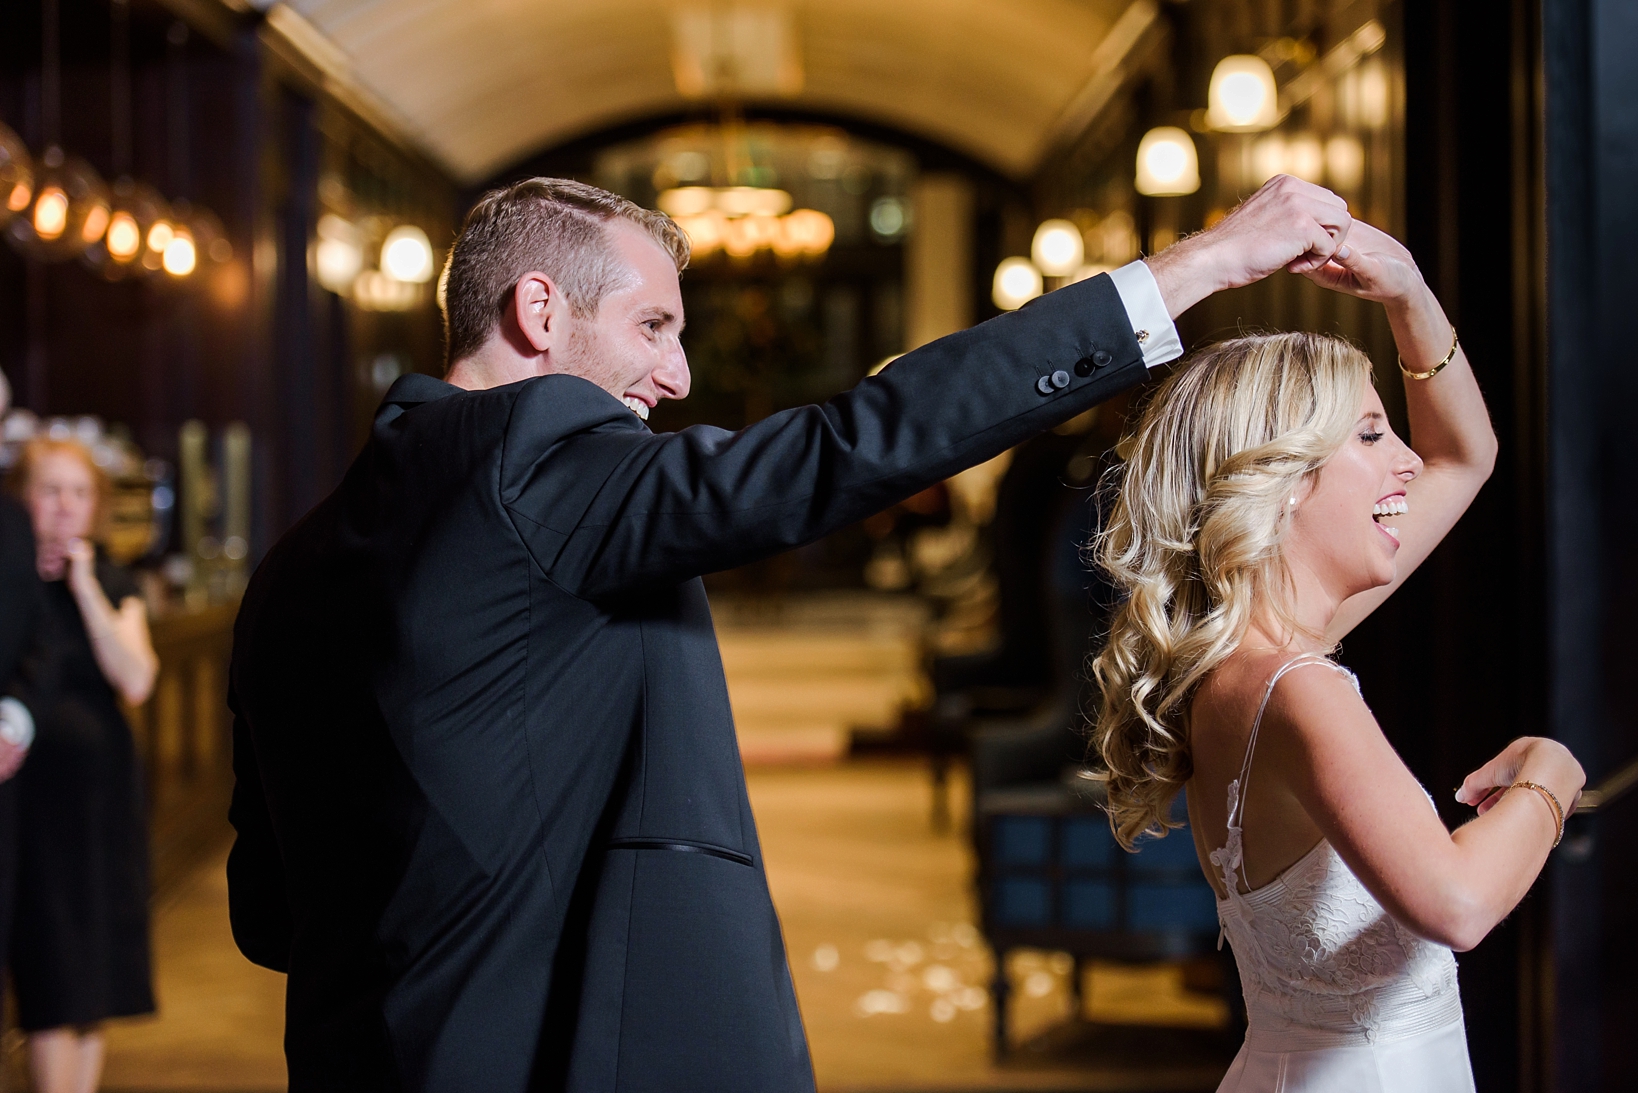 The Groom spins his Wife during their first dance on their wedding day